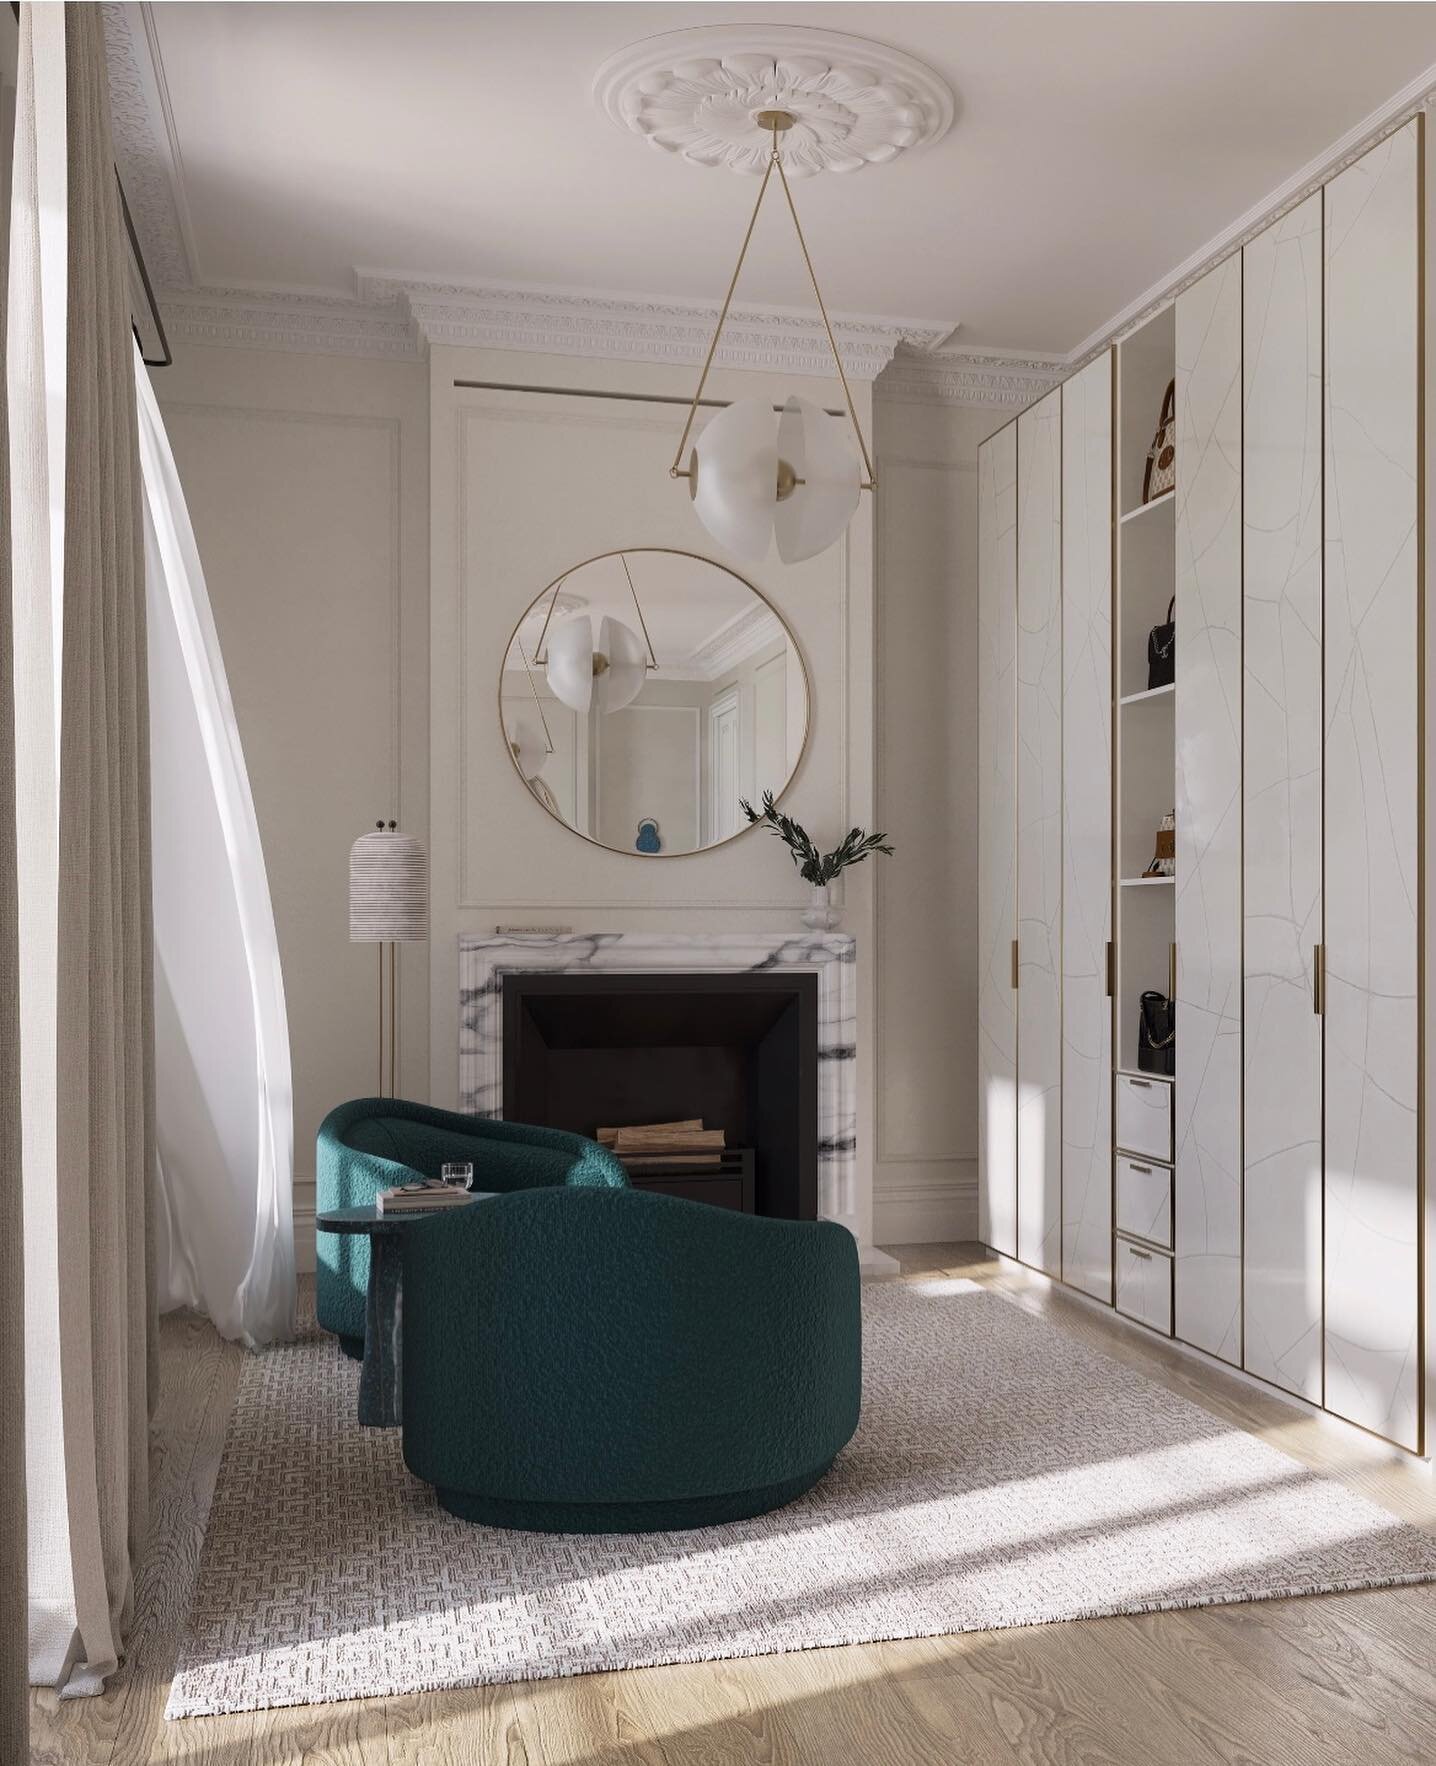 Interior details for this elegant Notting Hill home by @louiseholtdesign designed in collaboration with @nashbakerarchi #interiordesign #interiordetails #londoninteriors #interiorarchitecture #luxuryhomes #louiseholtdesign #elegantinteriors